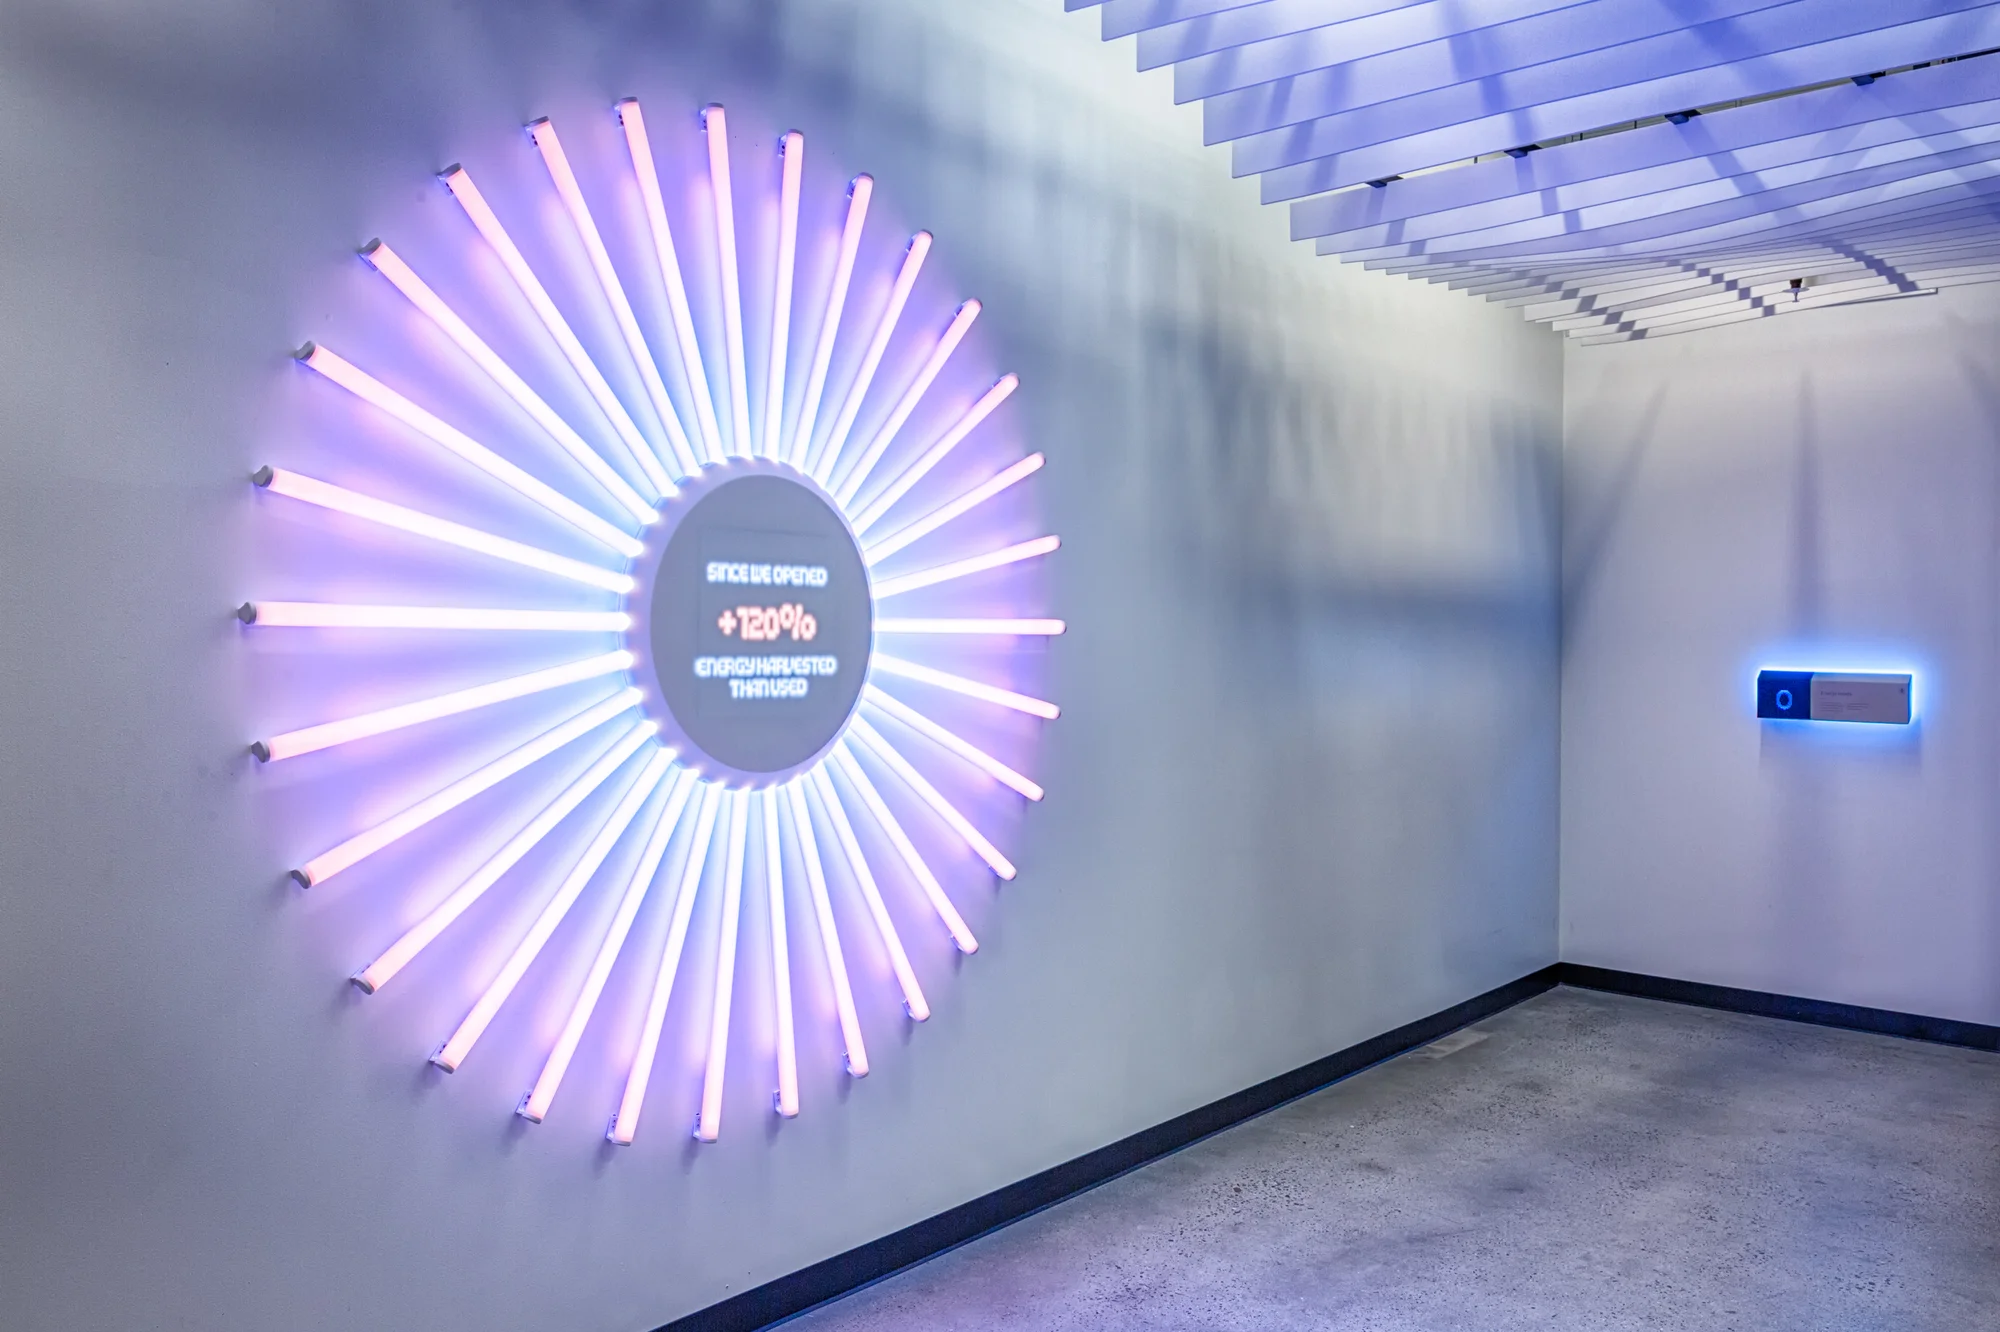 A wall inside a building features an installation that is made up of lines of lights that look like a sunburst. At the center is a digital screen that shows live energy data. The screen says, "Since we opened +120% energy harvested than used."